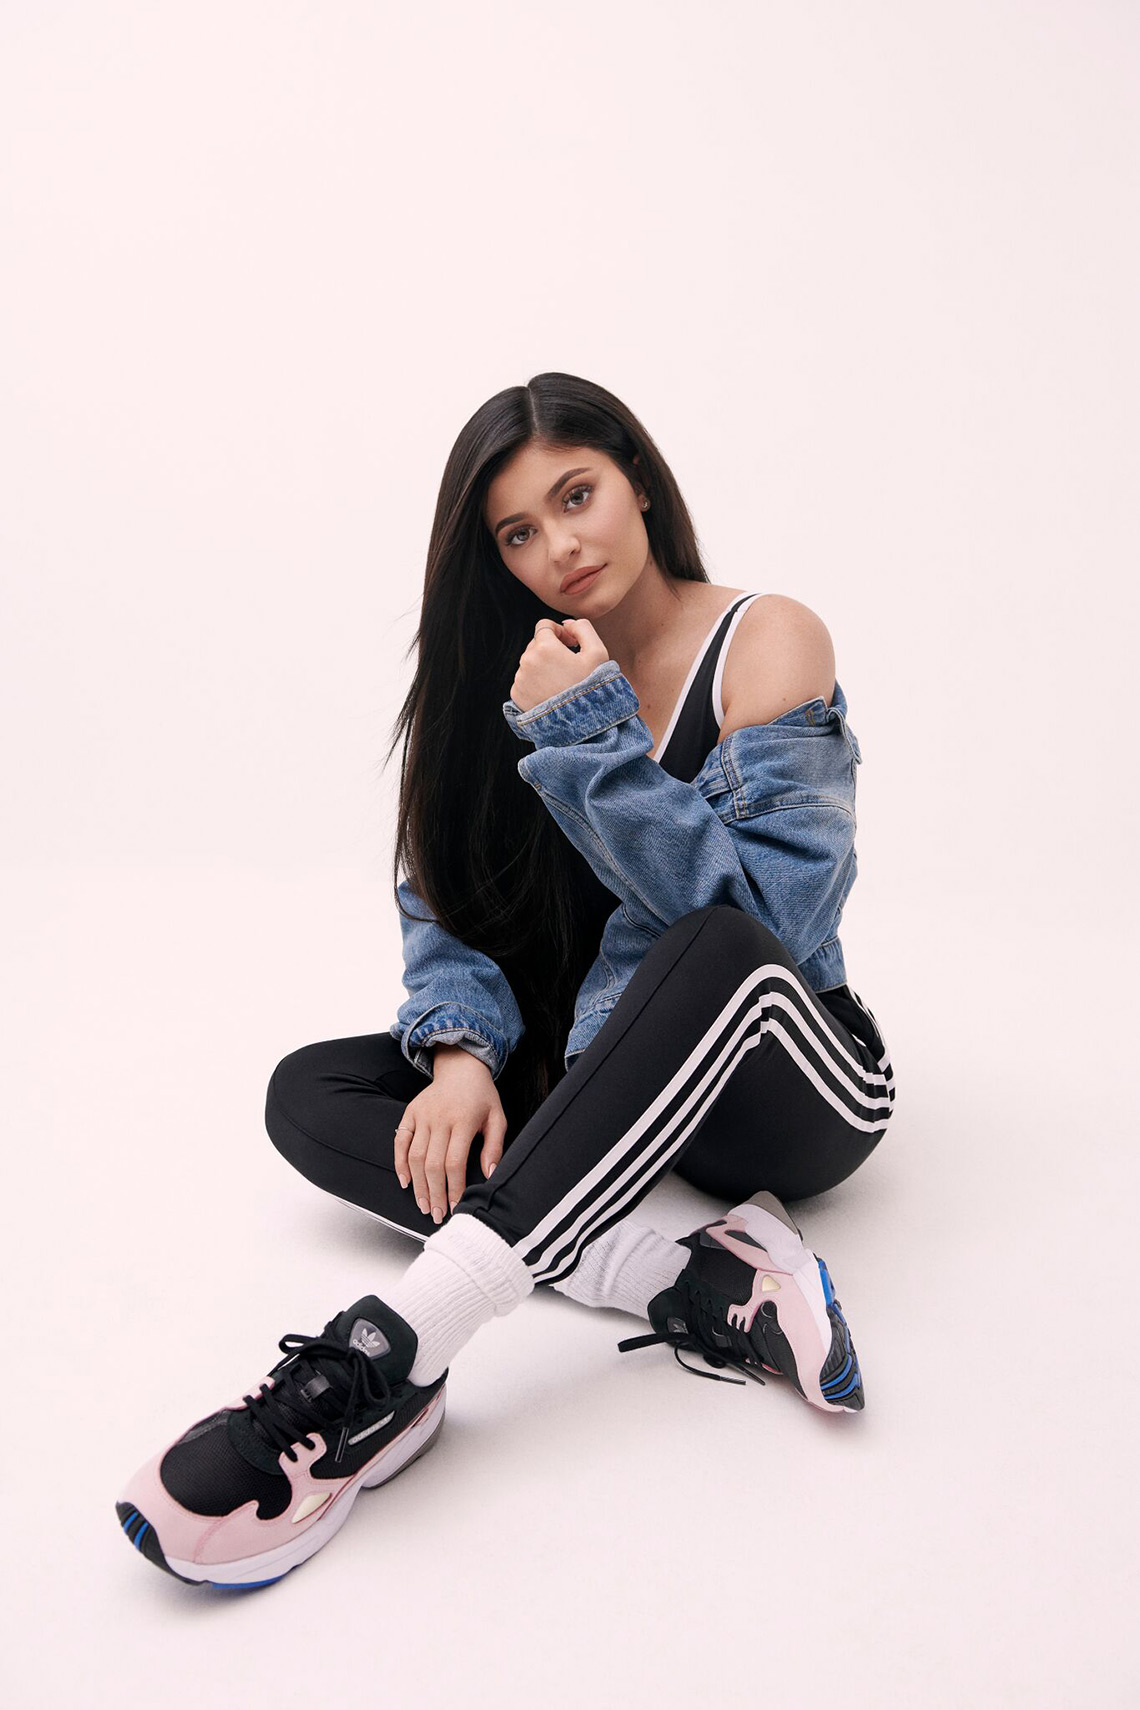 Kylie Jenner Falcon Photos + Release Info